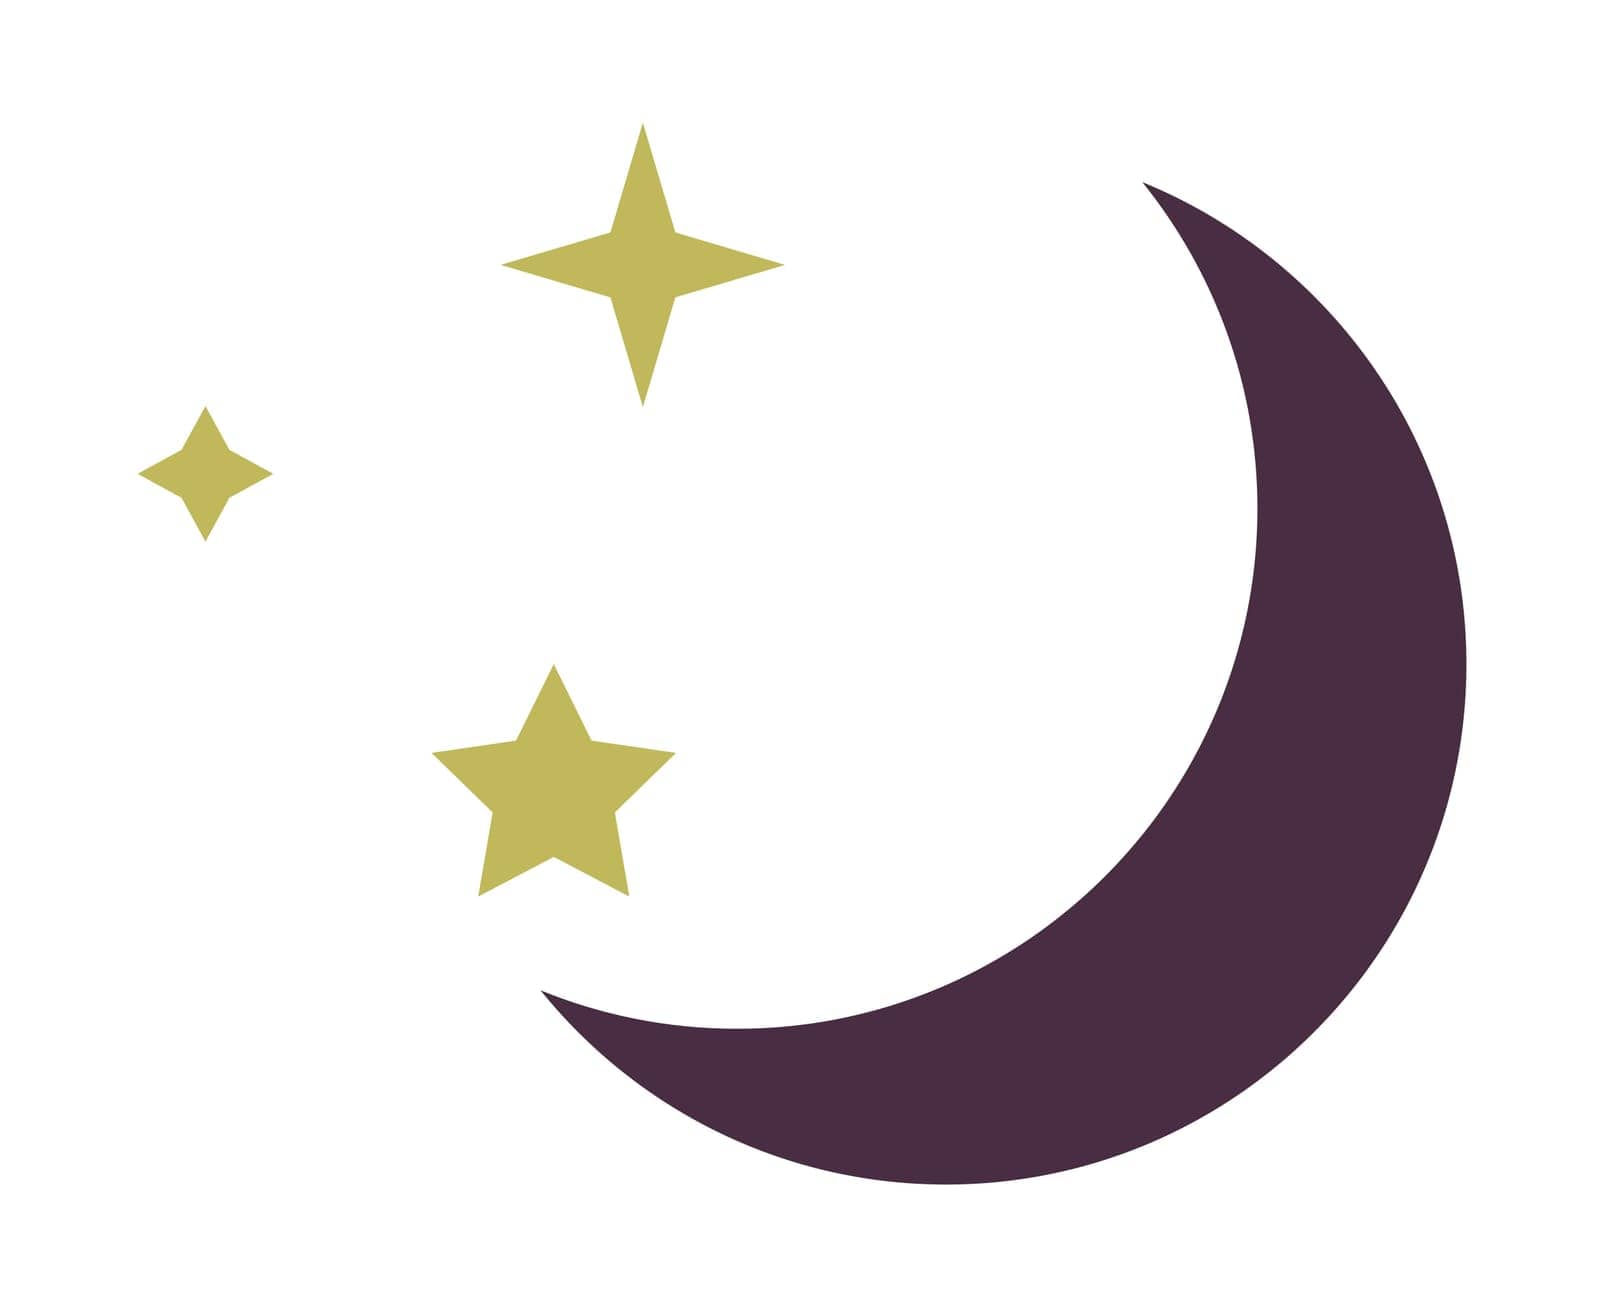 Mystic celestial bodies, crescent moon with stars by Sonulkaster